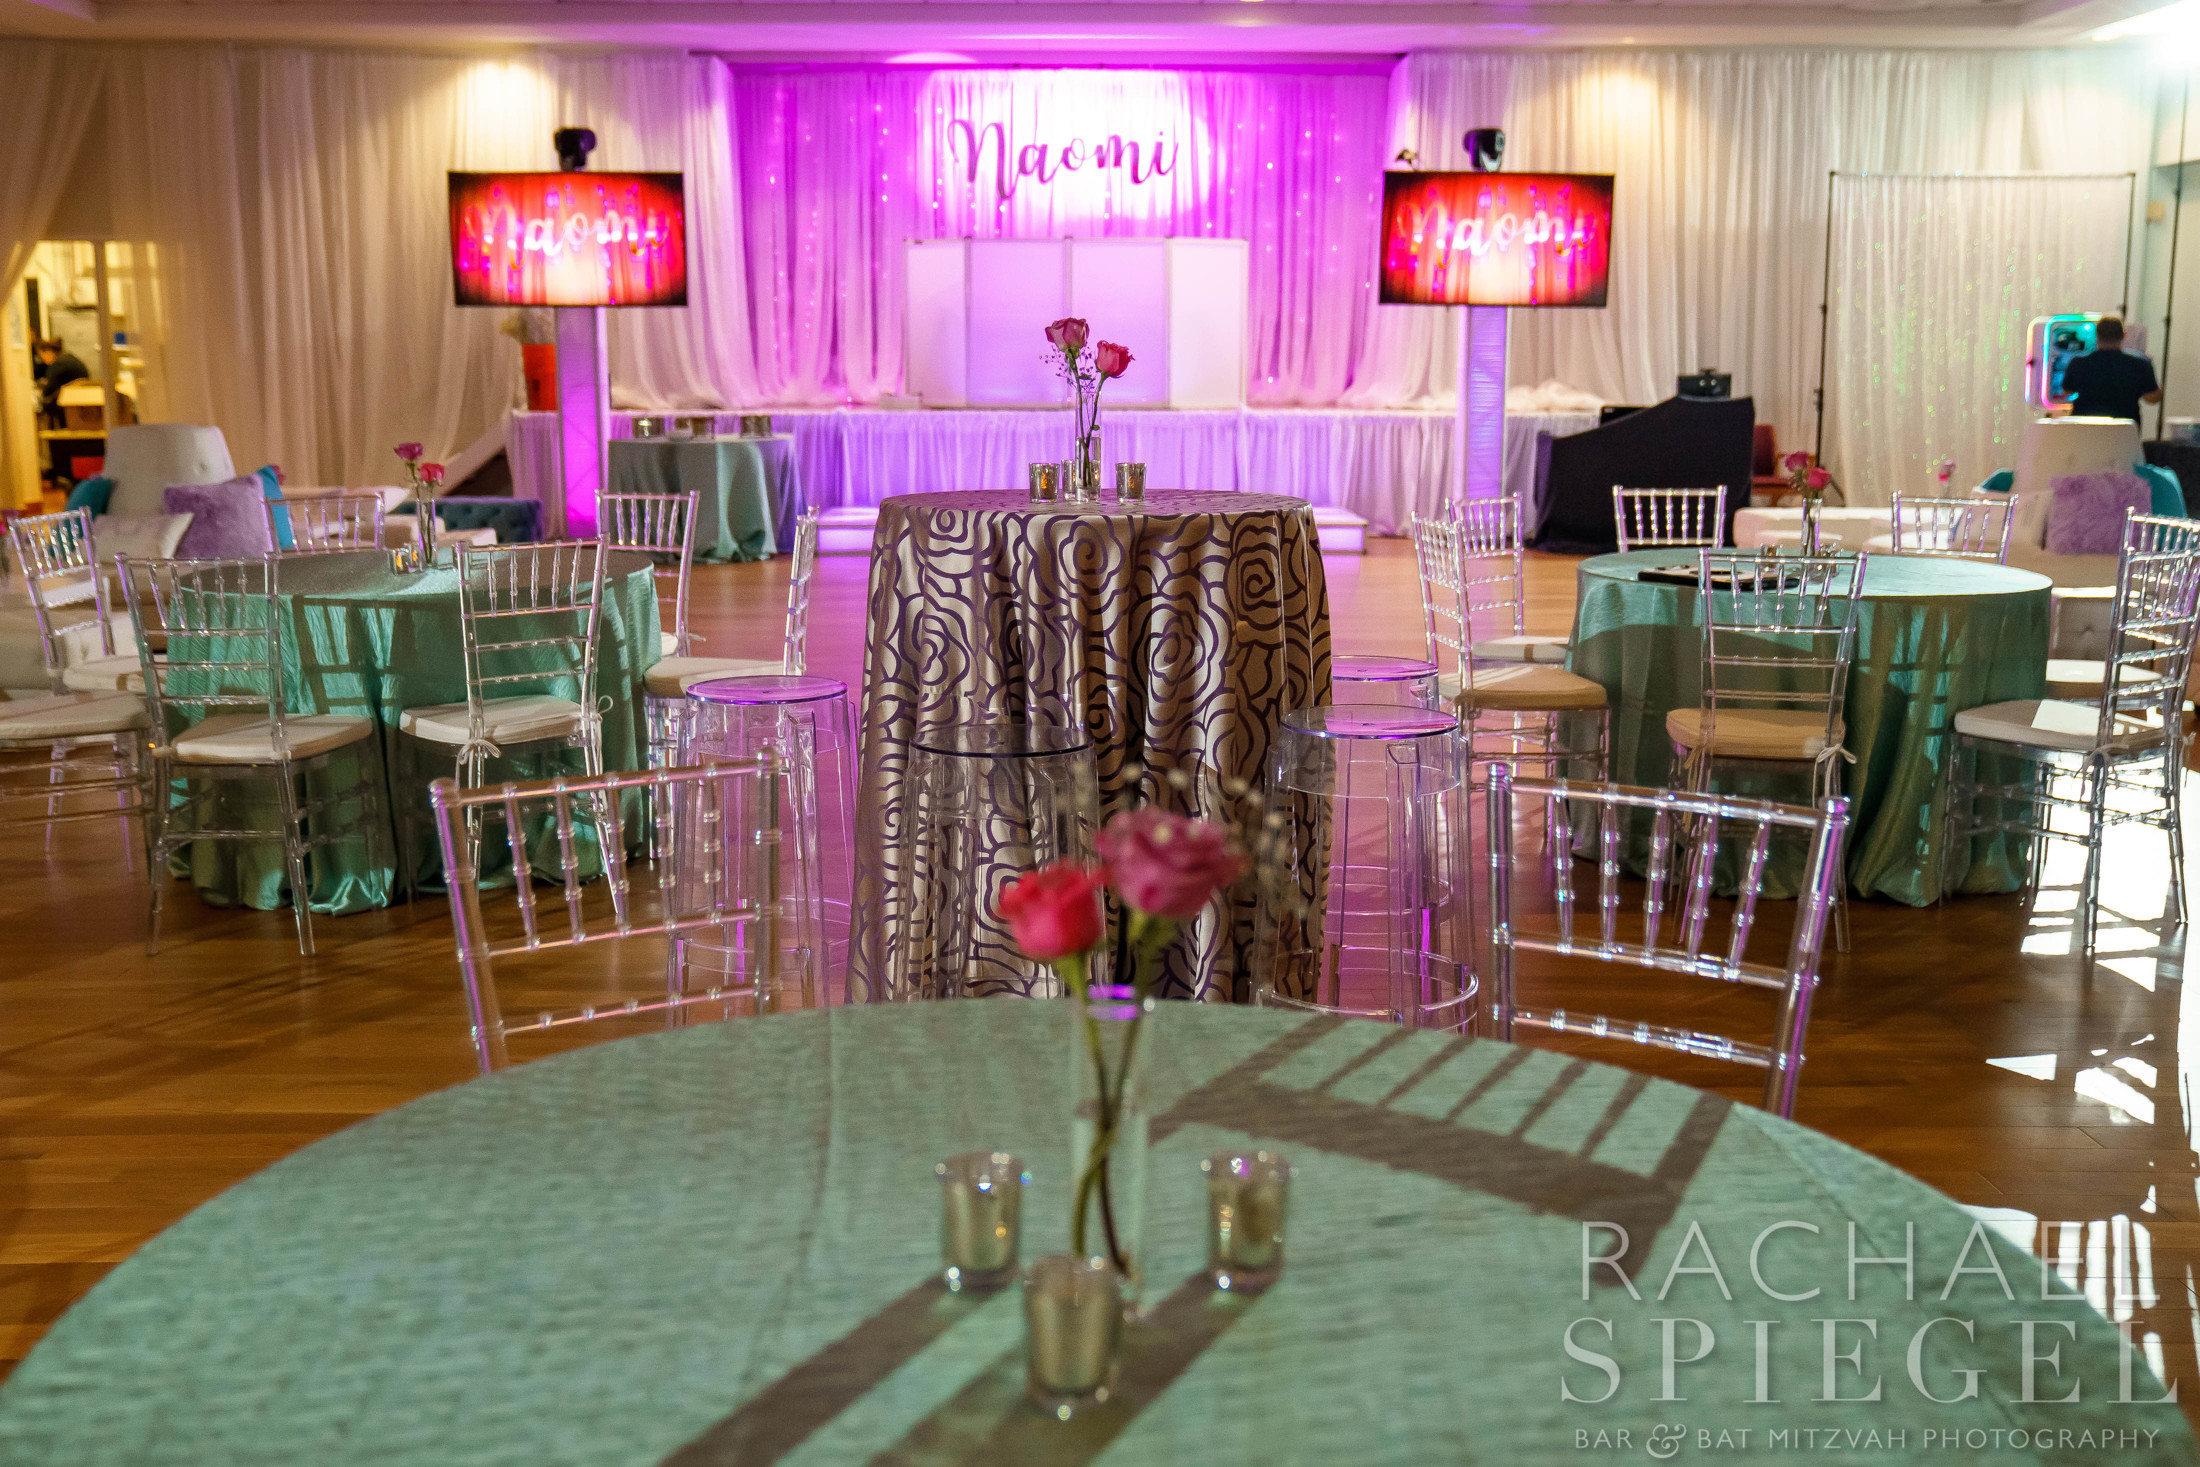 Naomi's fancy reception with pink, blue and purple decors at Naomi's Pink and Purple Floral Bat Mitzvah Party at Temple Sinai in Washington, DC | Pop Color Events | Adding a Pop of Color to Bar & Bat Mitzvahs in DC, MD & VA | Photo by: Rachael Spiegel Photography